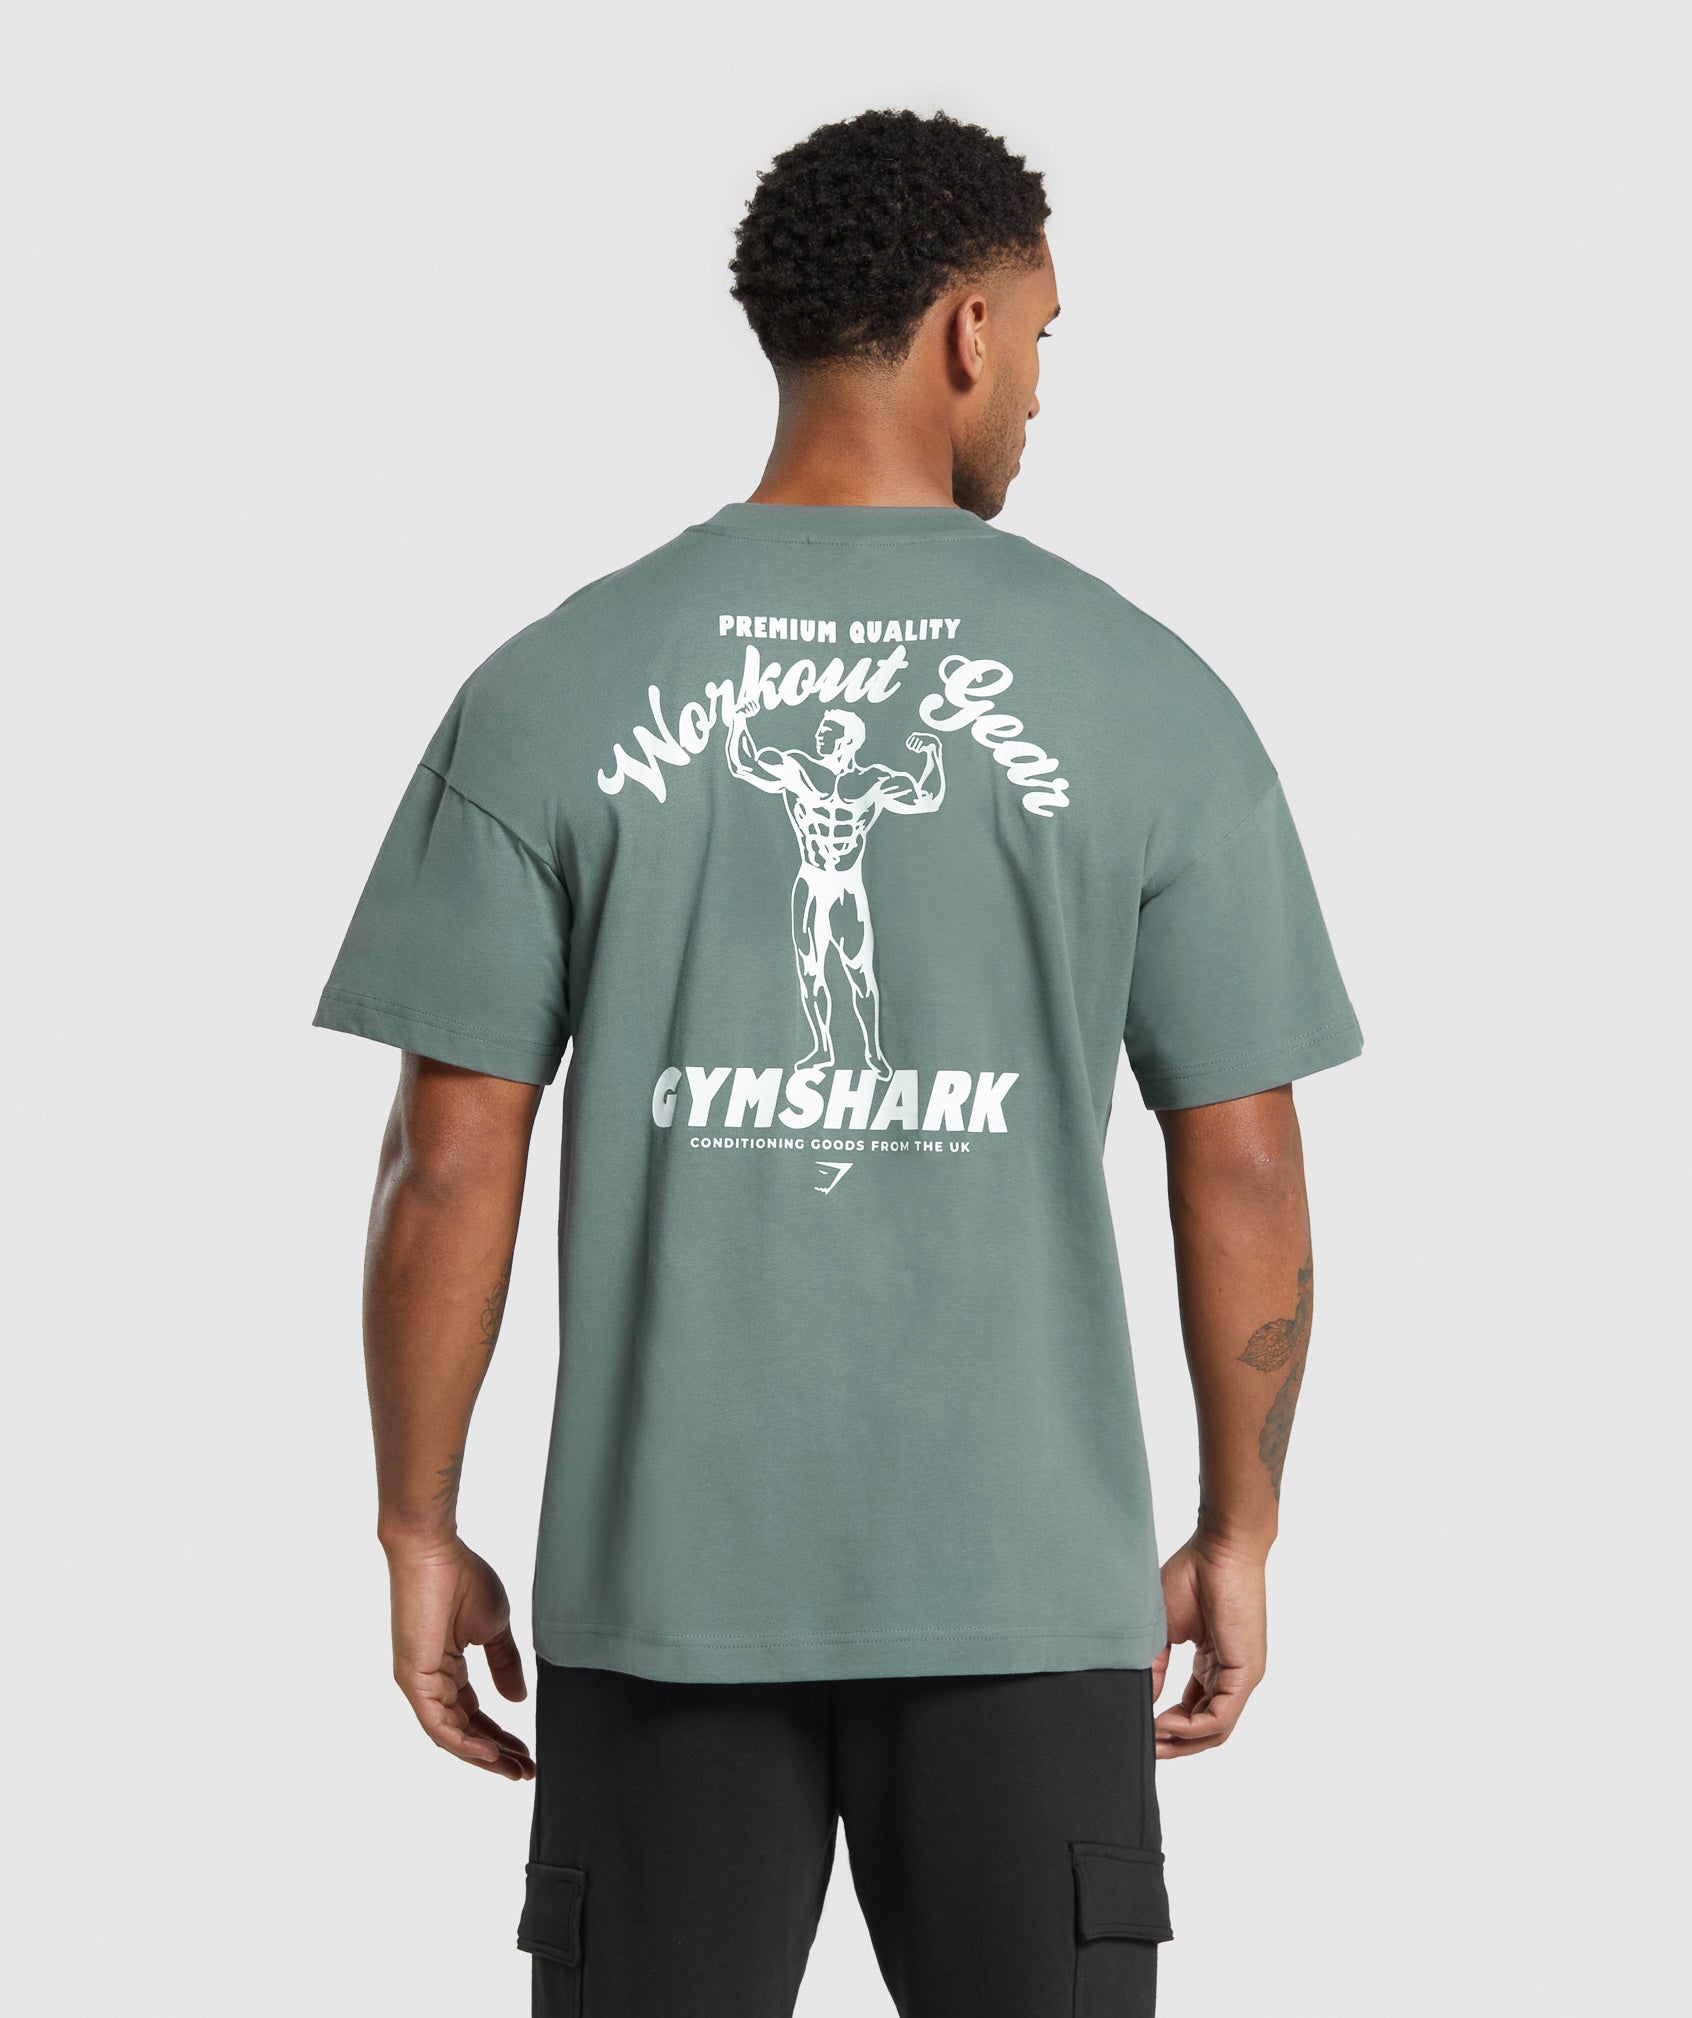 Workout Gear T-Shirt in Cargo Teal - view 1